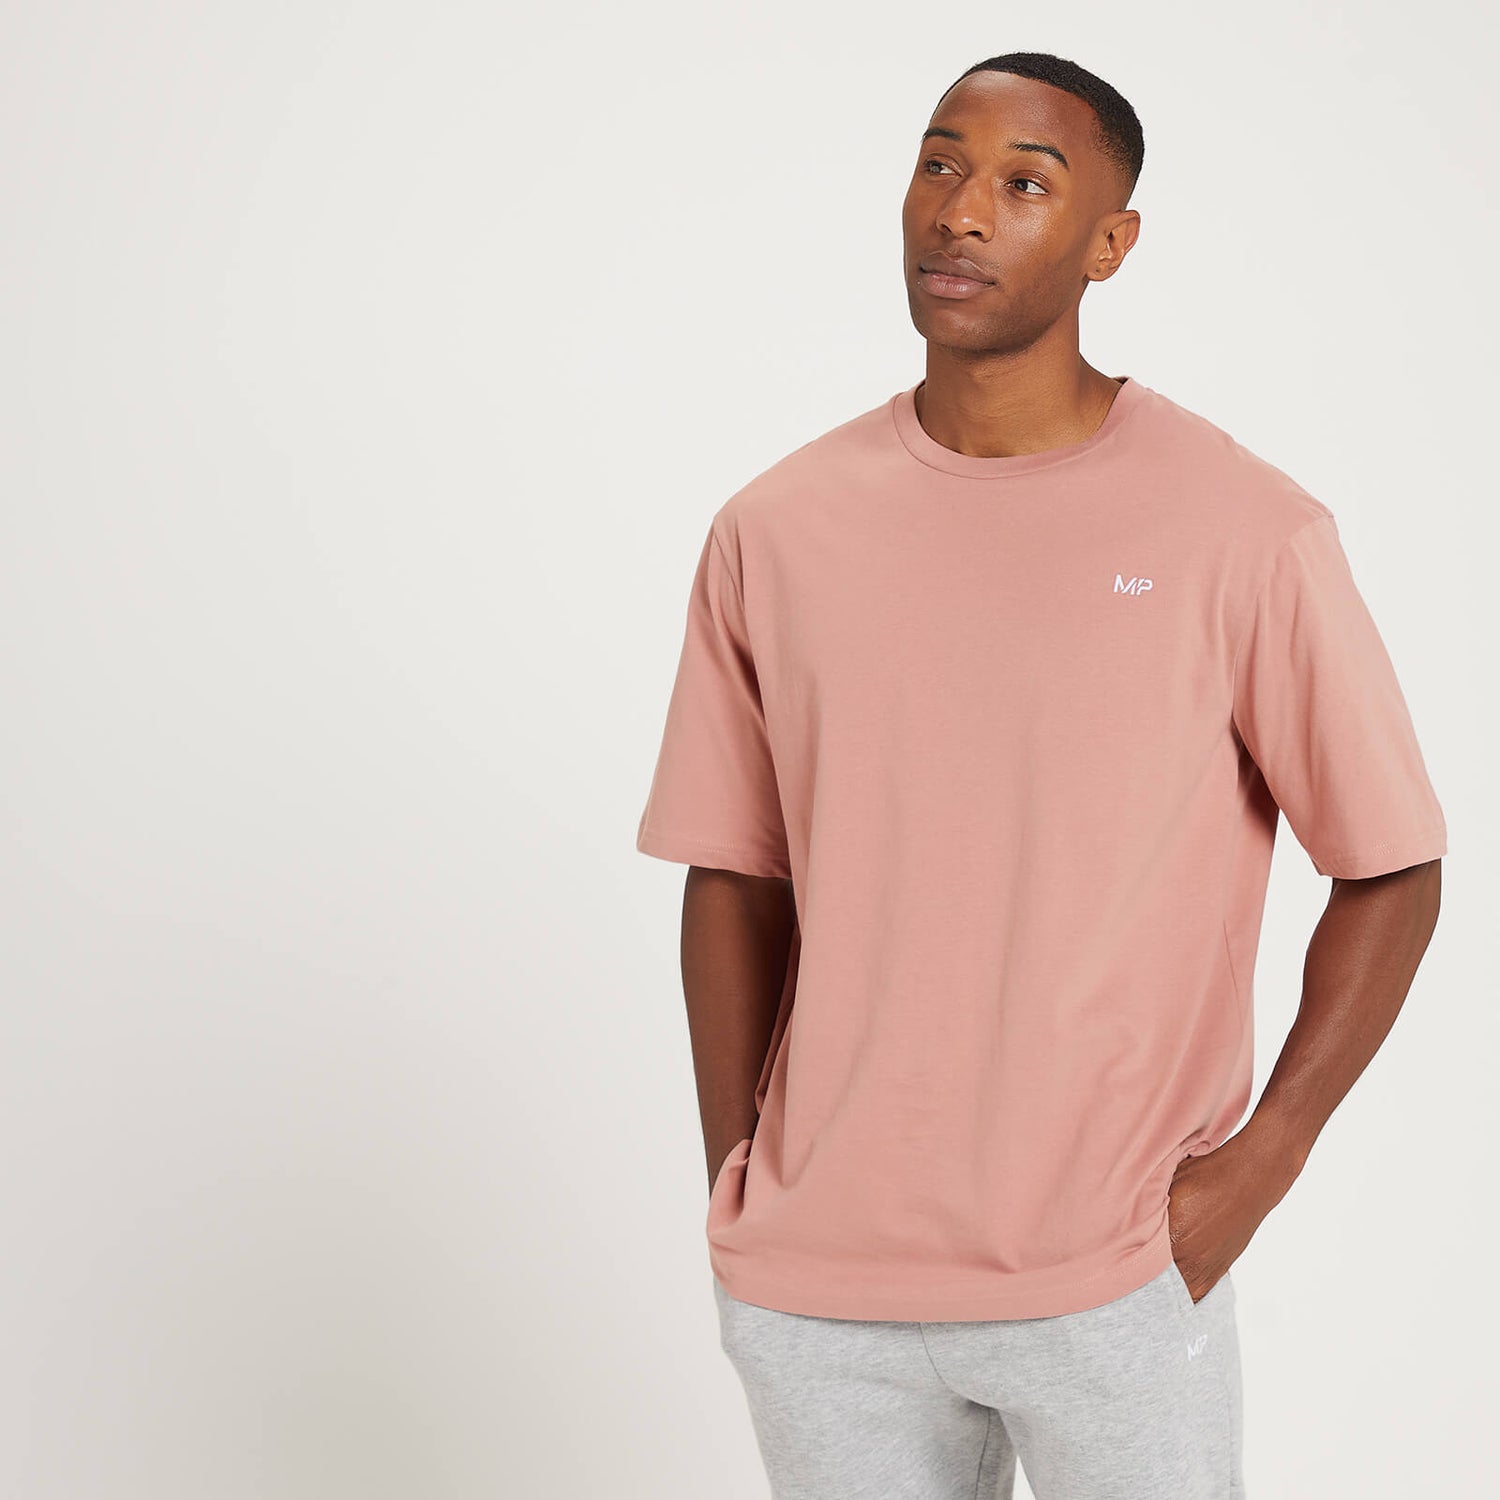 MP Men's Rest Day Oversized T-Shirt - Washed Pink - XS